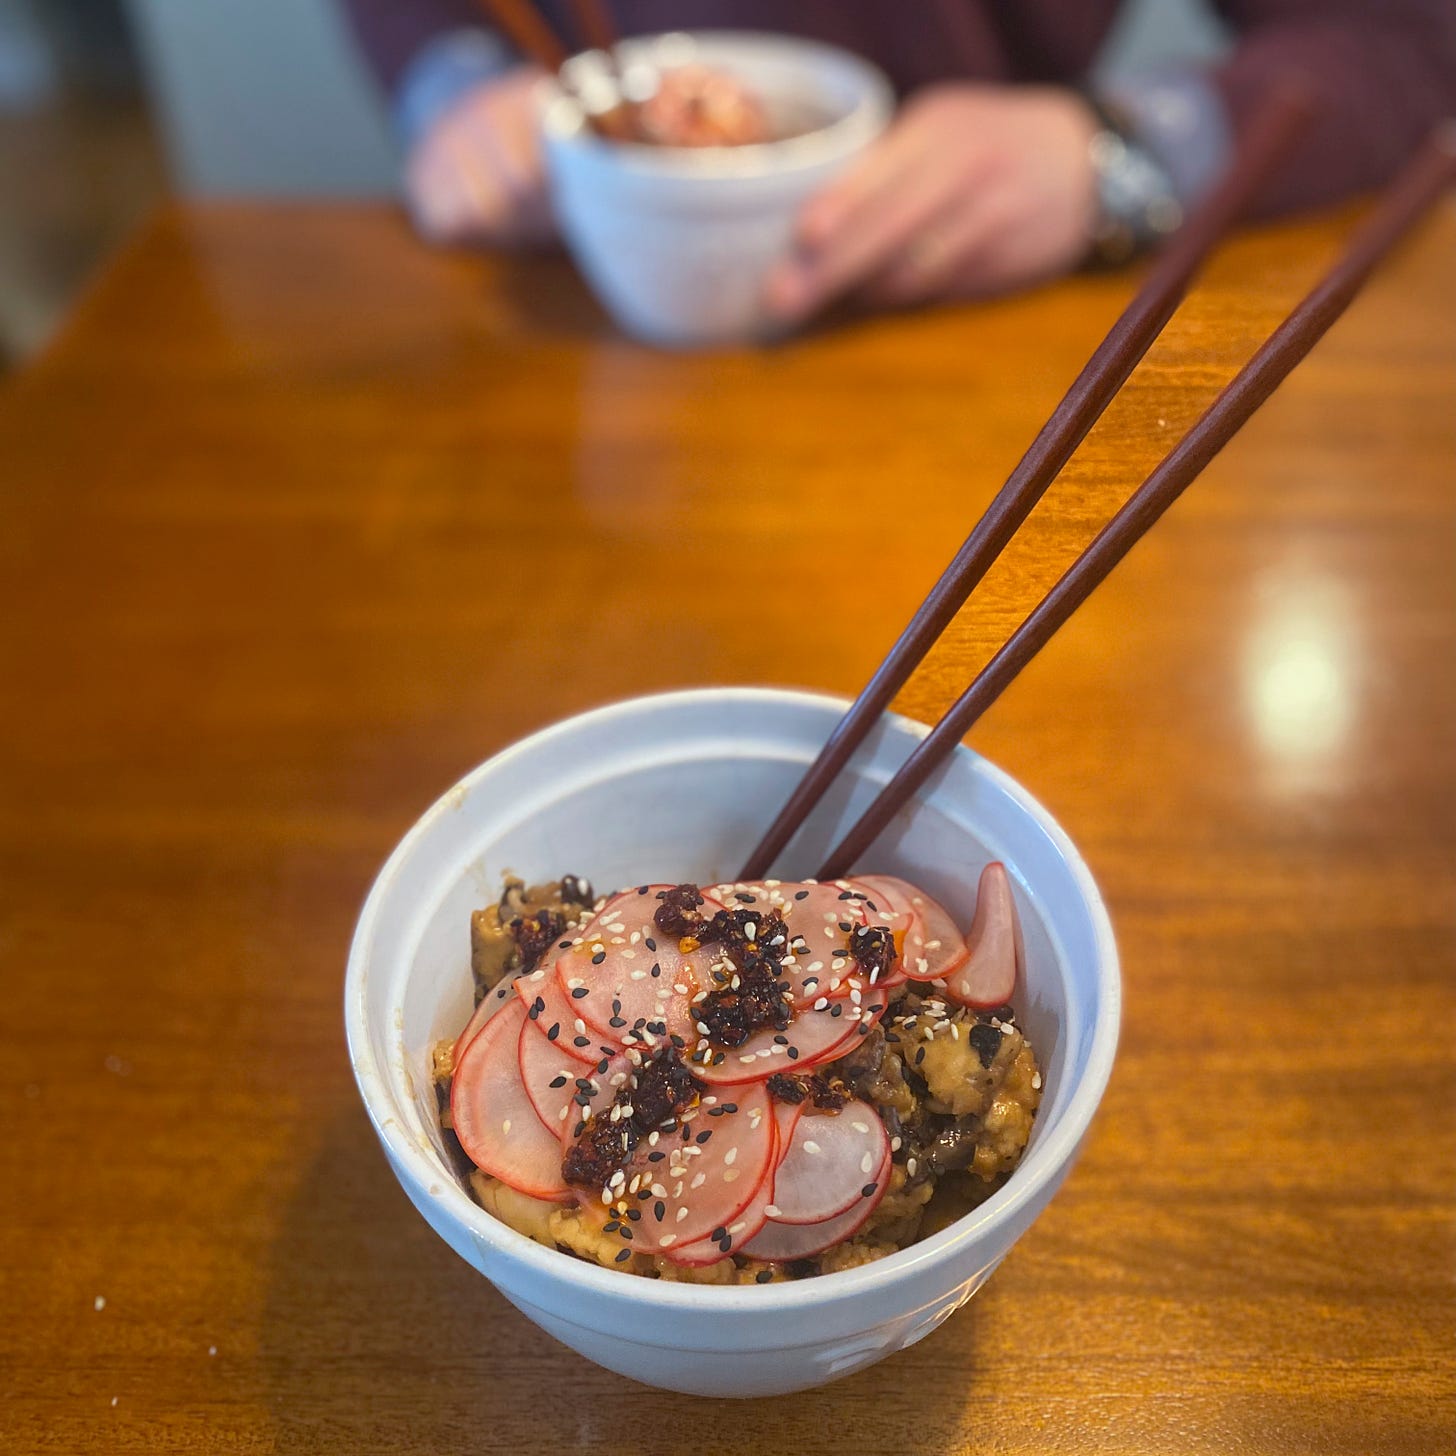 Two white bowls with chopsticks in them across from each other on the table, filled with noodles and tofu and mushrooms in sauce, and topped with thinly sliced pickled radish, sesame seeds, and chili crisp.